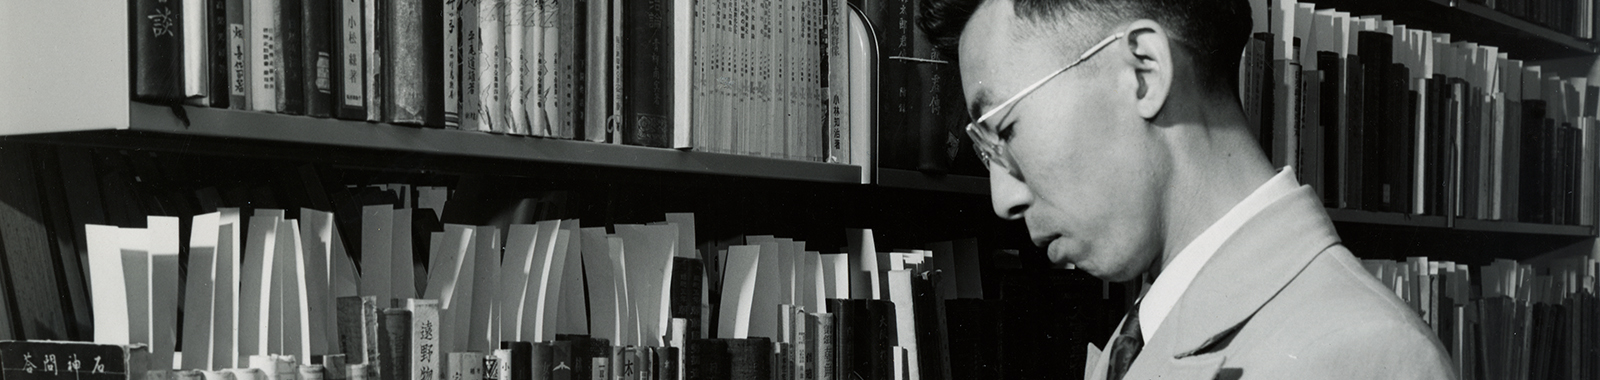 Black and white photo of a researcher looking at Hoover's Asian library stacks